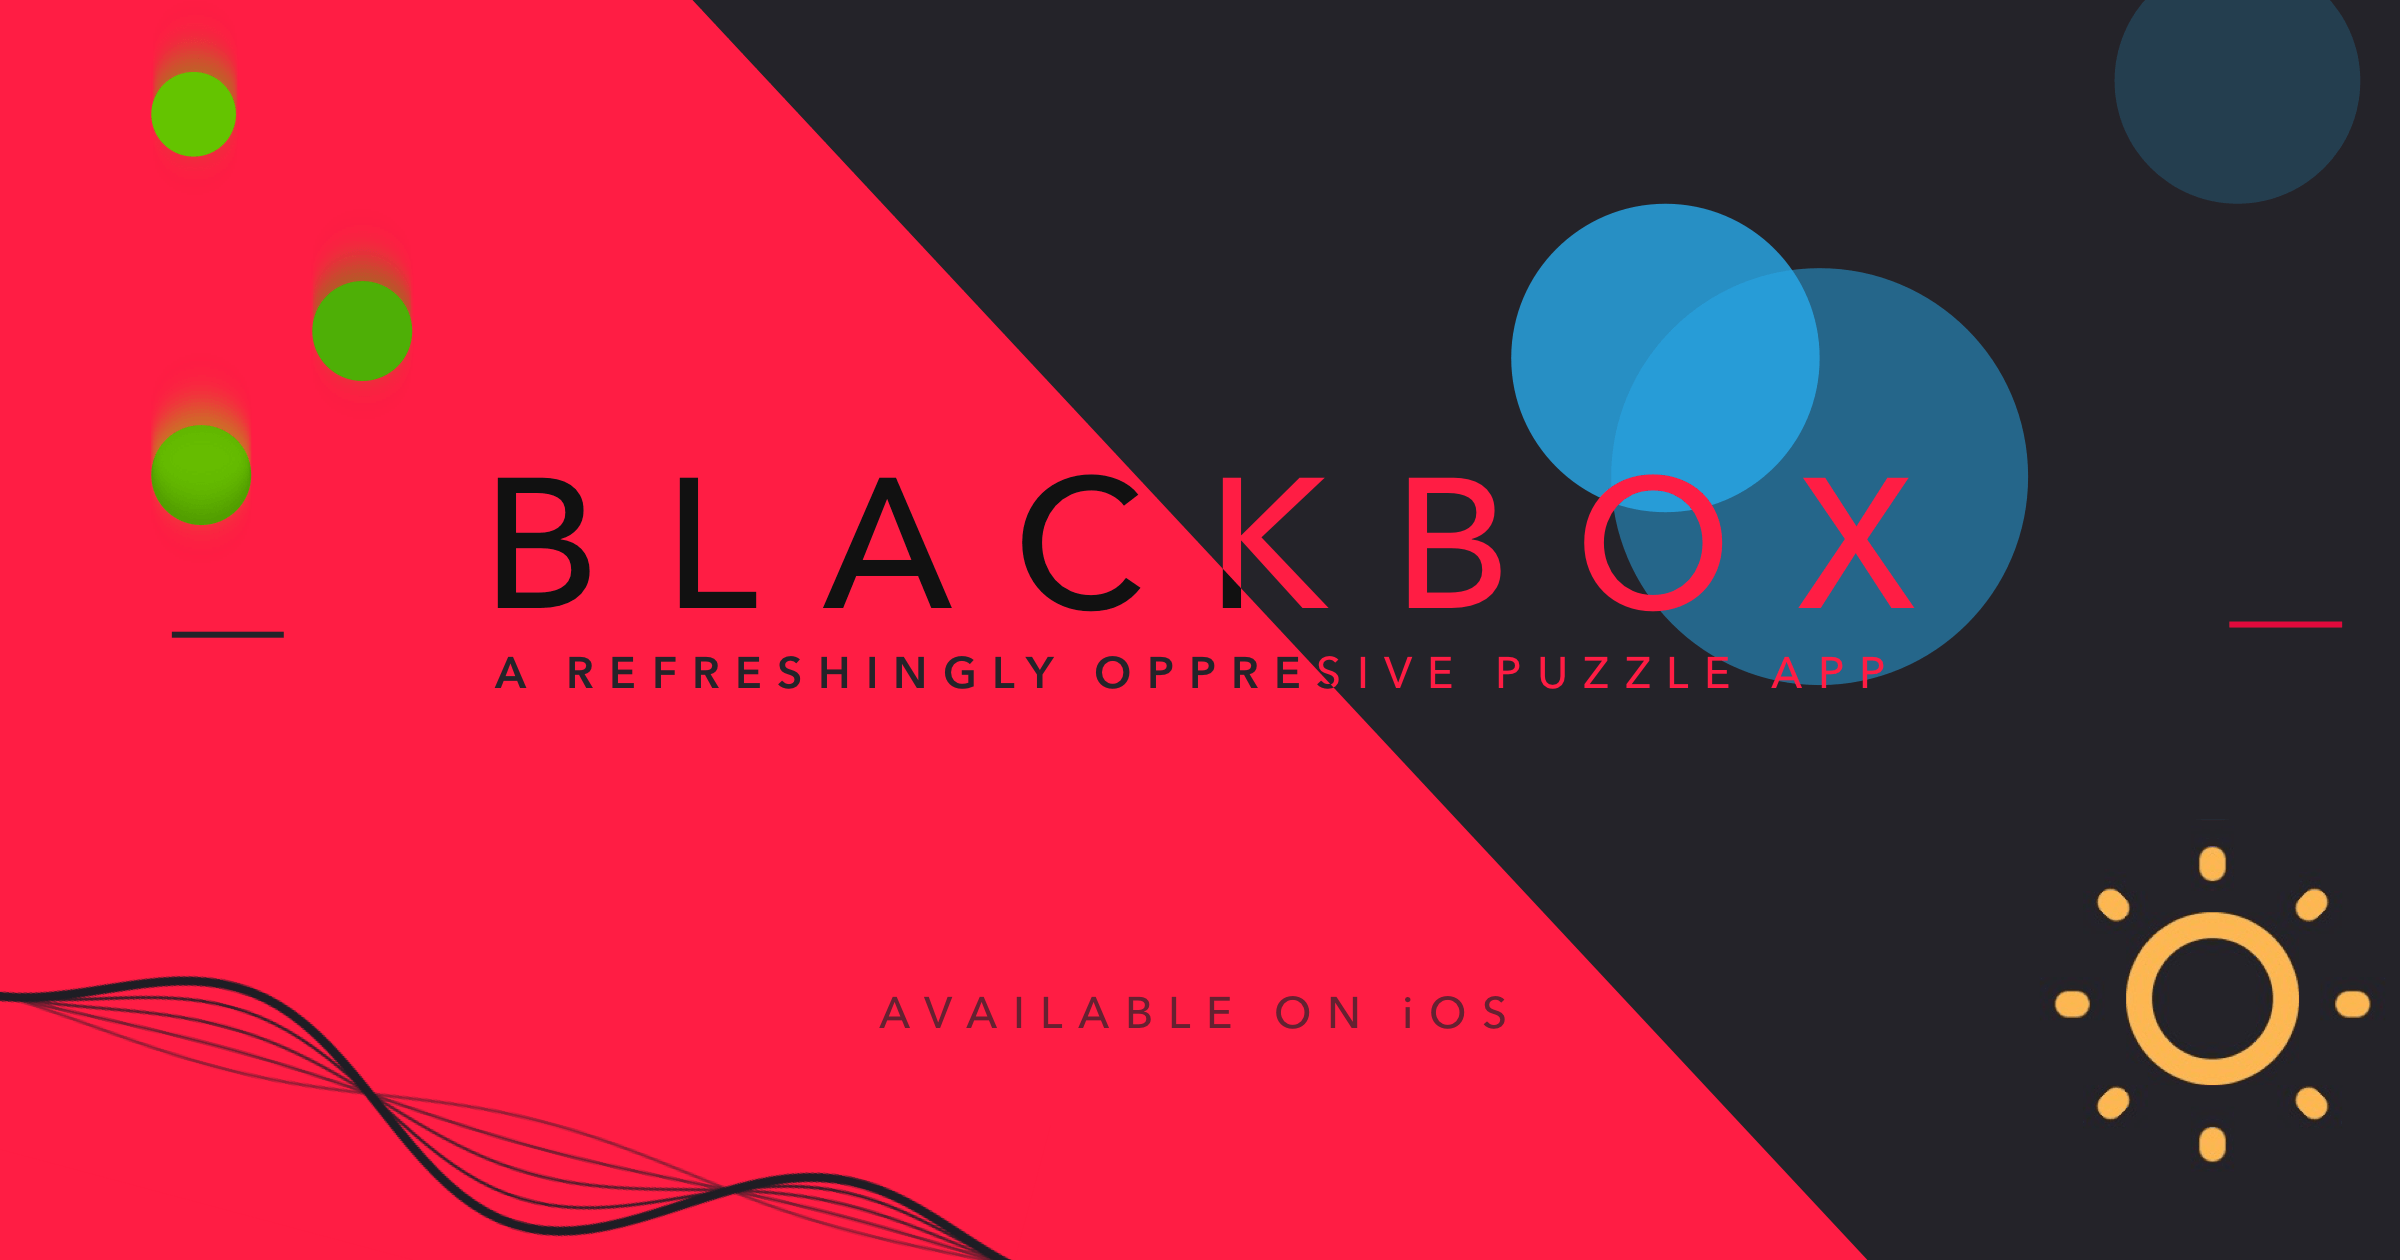 Unique Puzzler Blackbox Has You Thinking Outside The Box